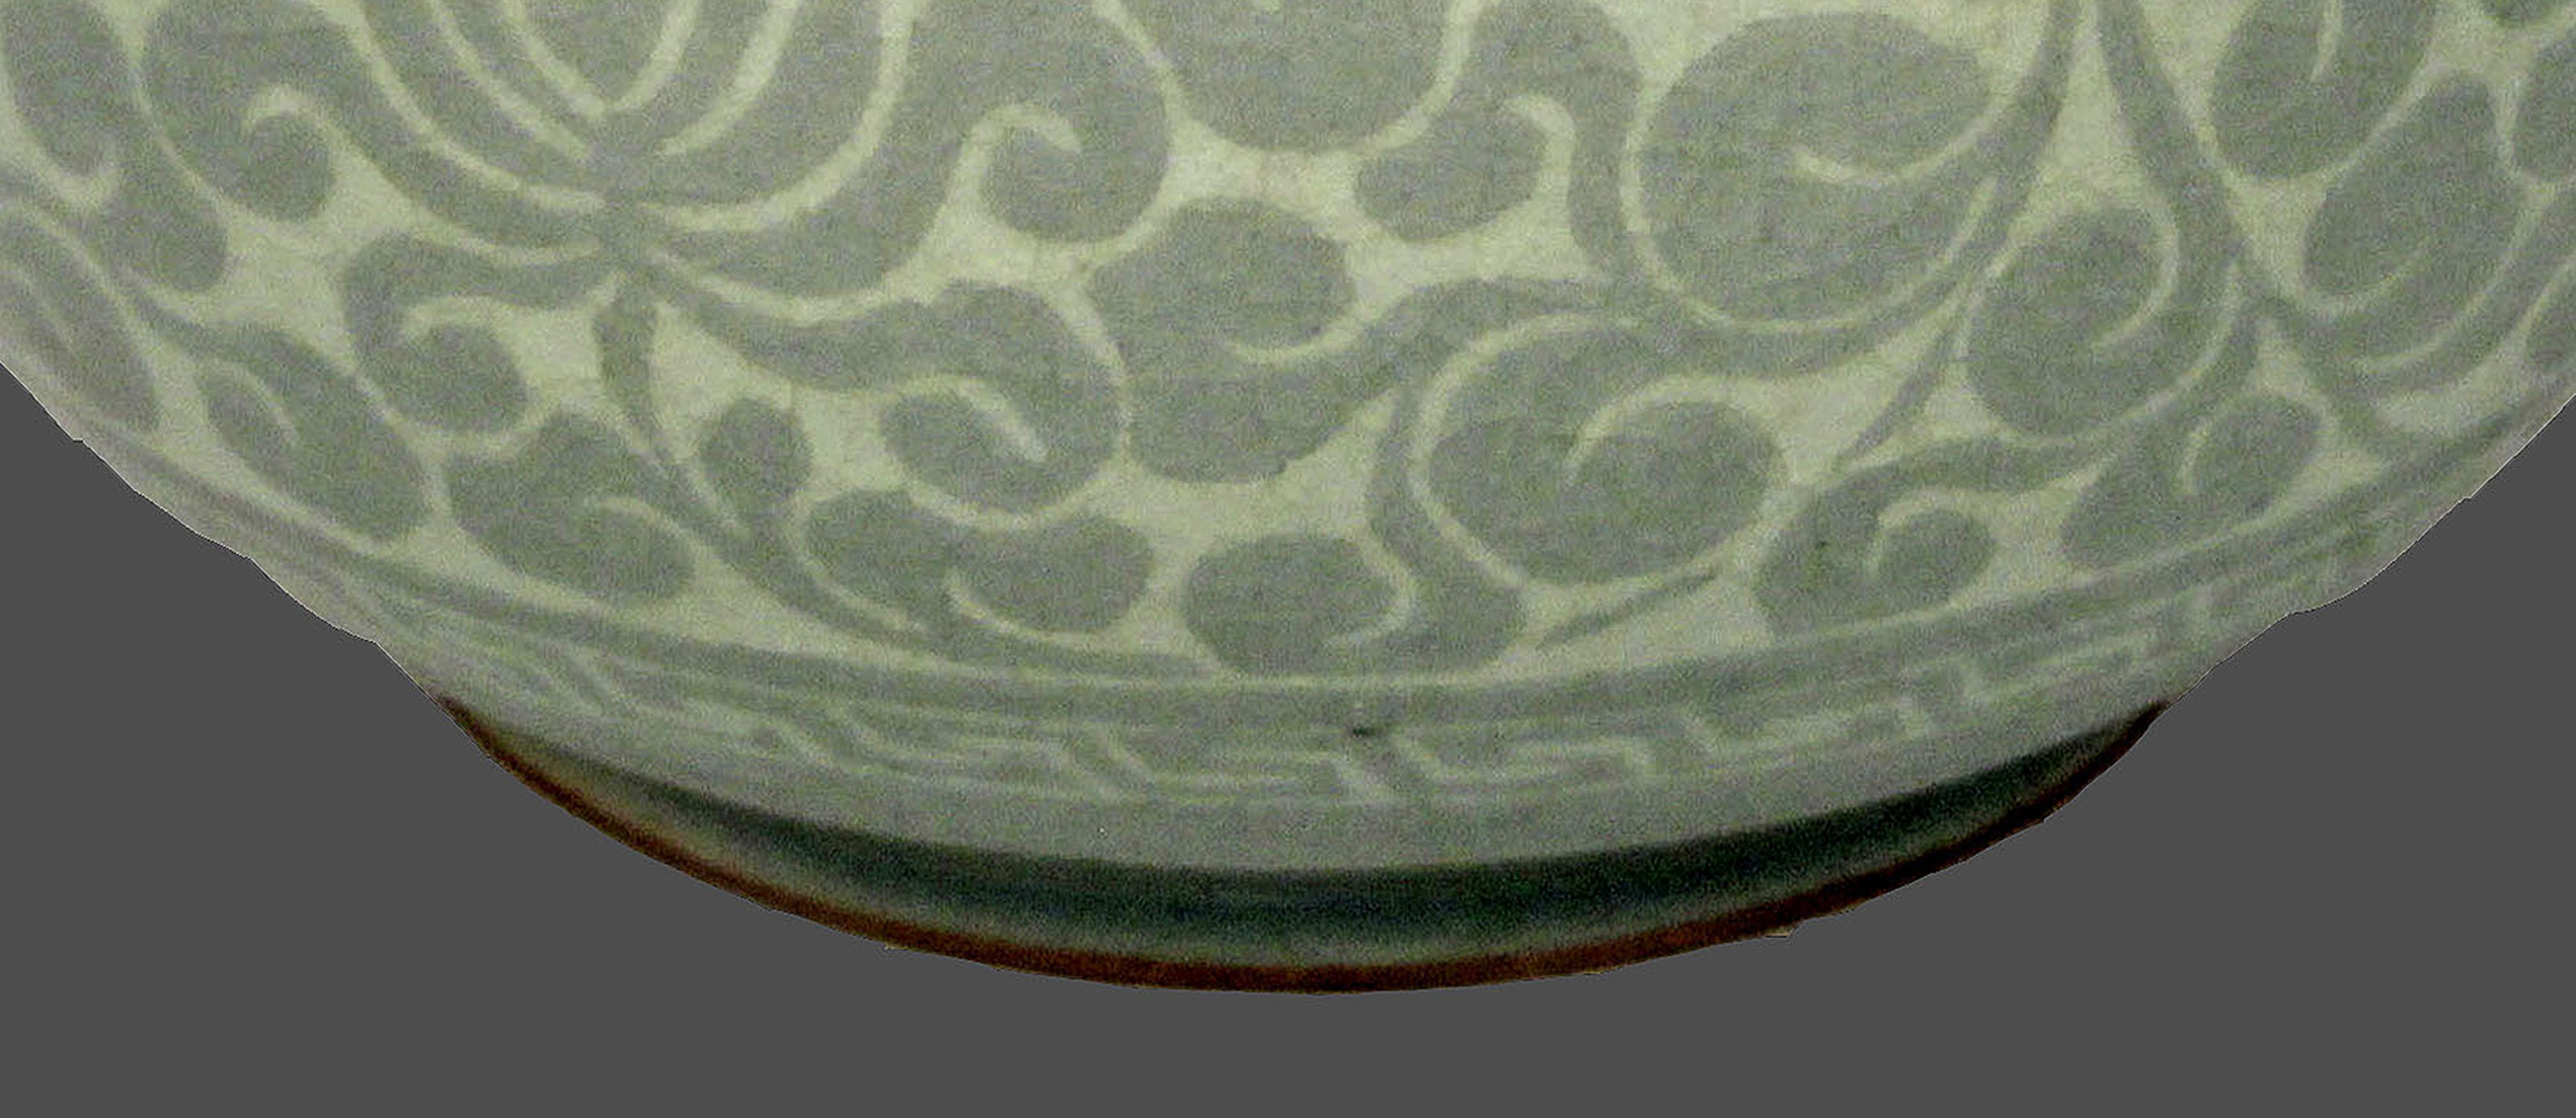 South Korean Mid-20th Century Korean Hand-Crafted Ceramic Celadon Vase with Lotus Decoration For Sale